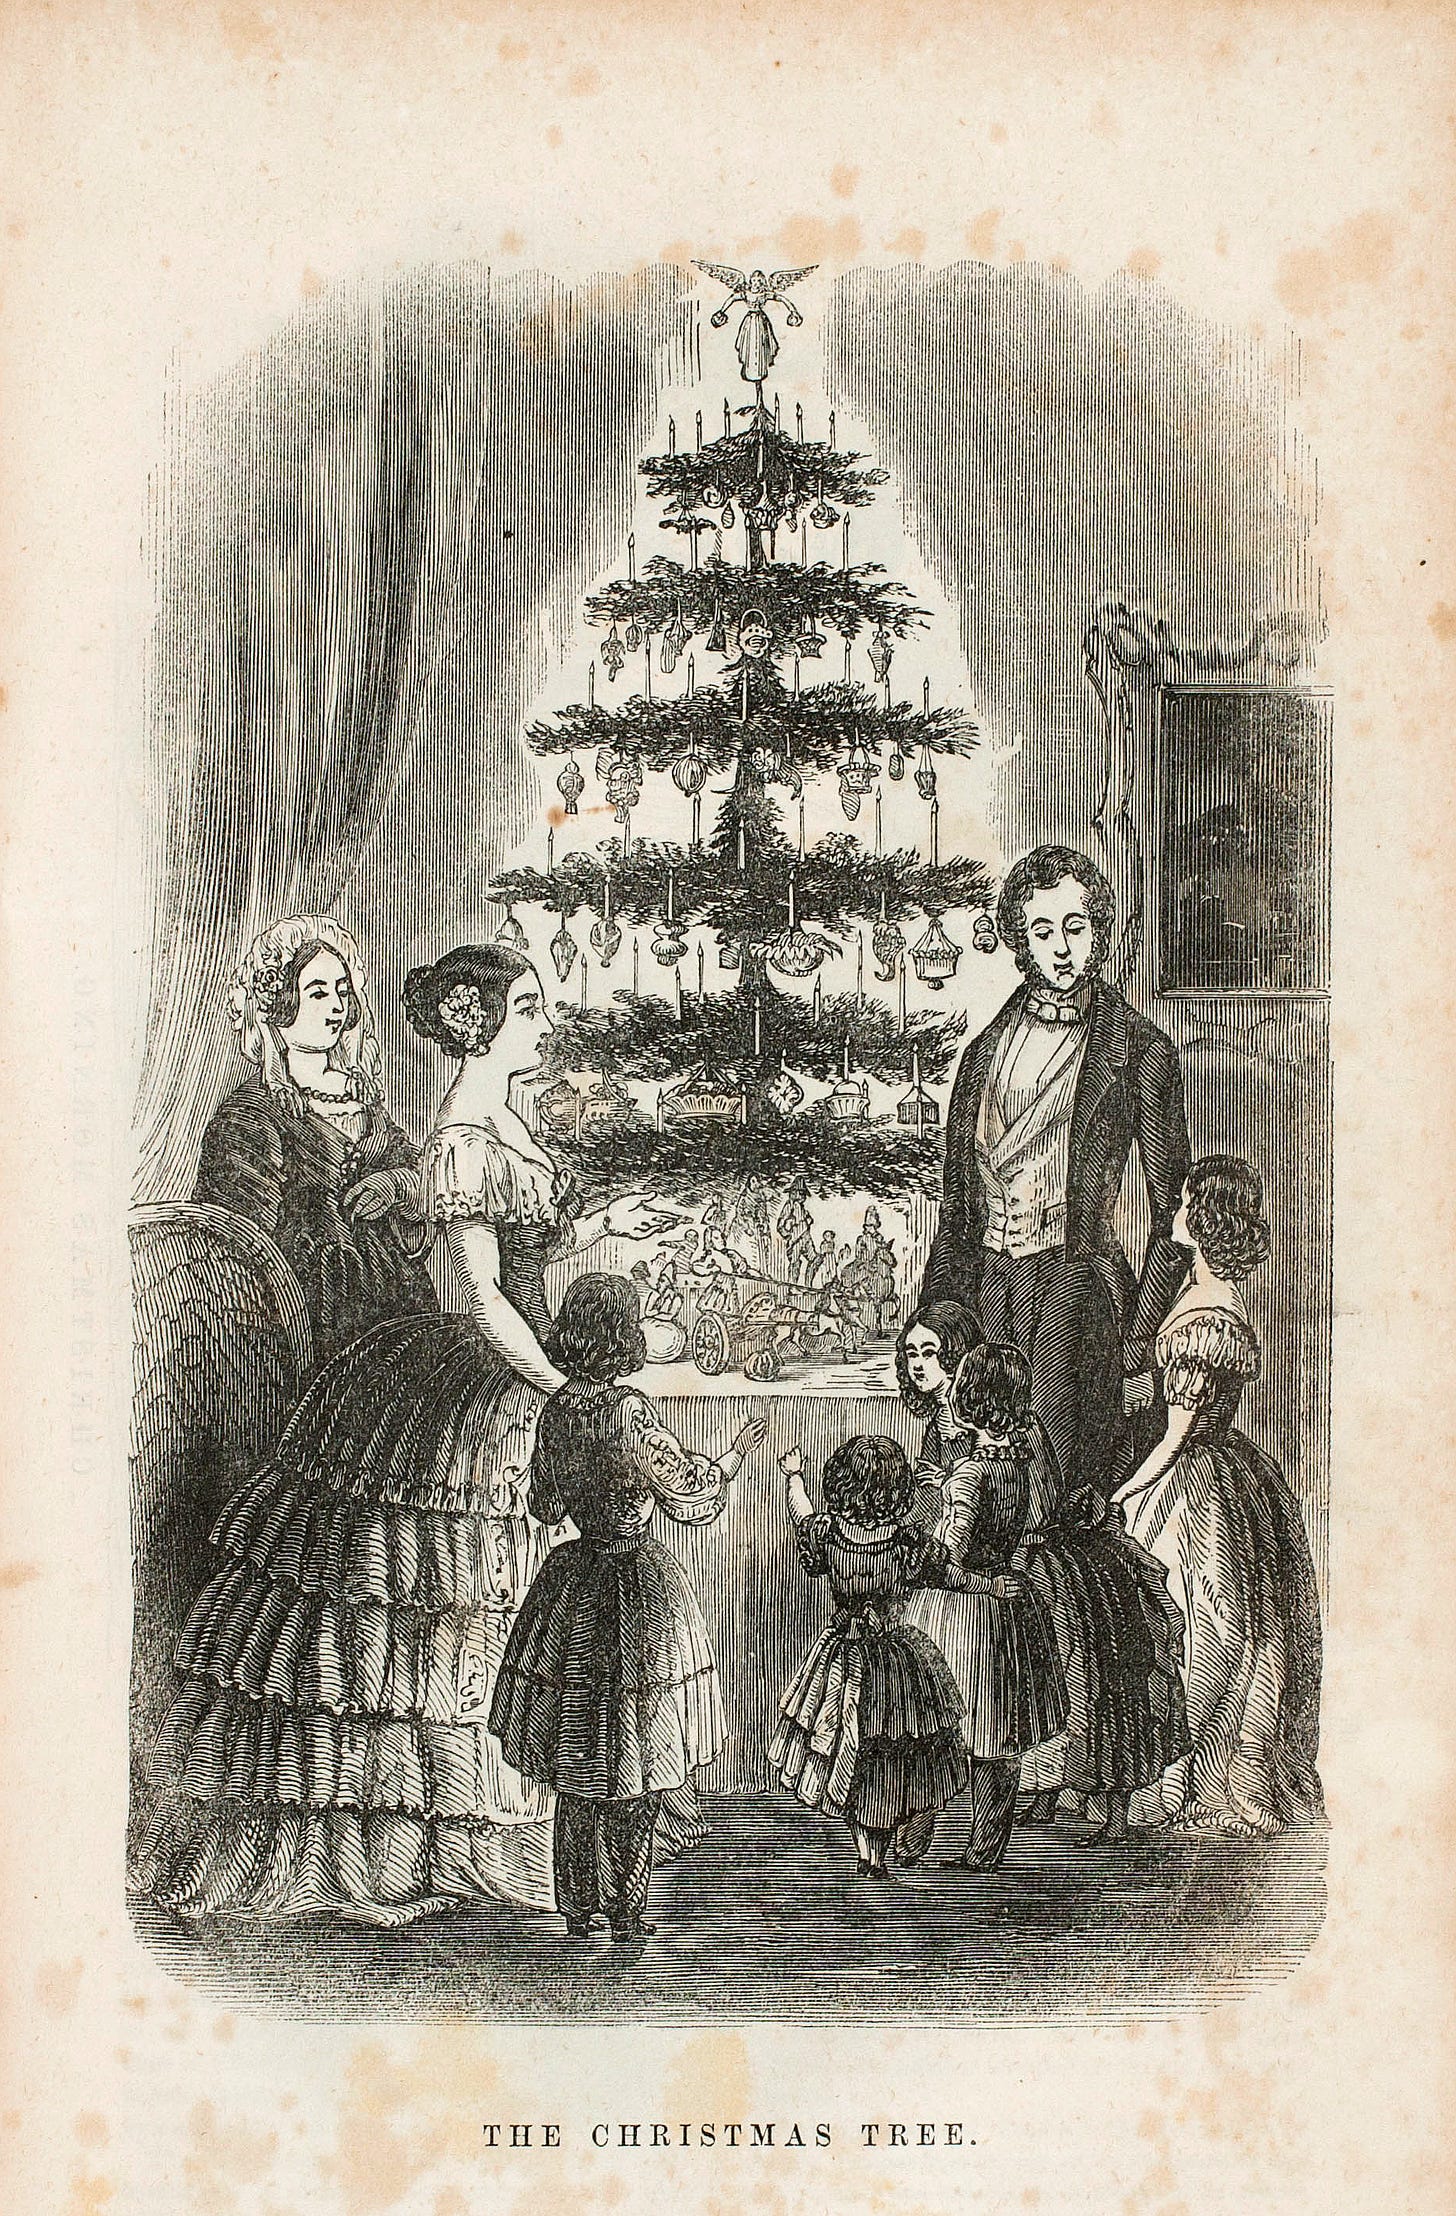 black-and-white engraving of Victorian family in front of tabletop Christmas tree. Tree is decorated with dangling ornaments and topped with an angel. Family 